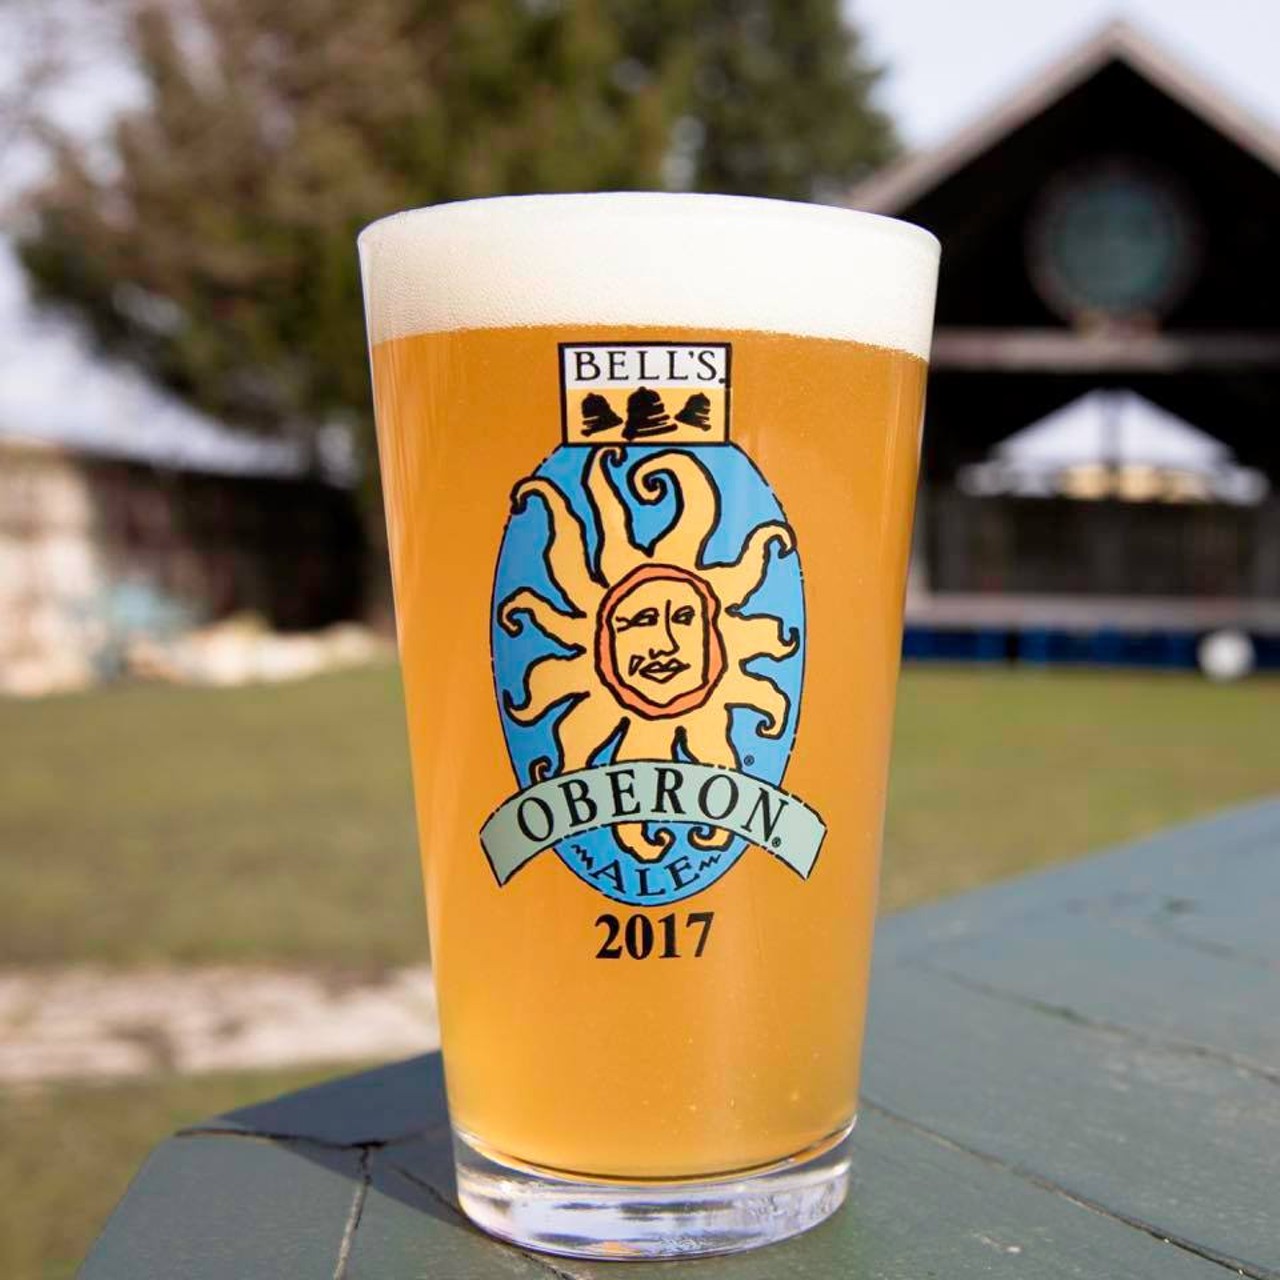 You know it's spring when you walk into your local haunt and see Oberon on tap.
Photo via Bell's Brewery Facebook page